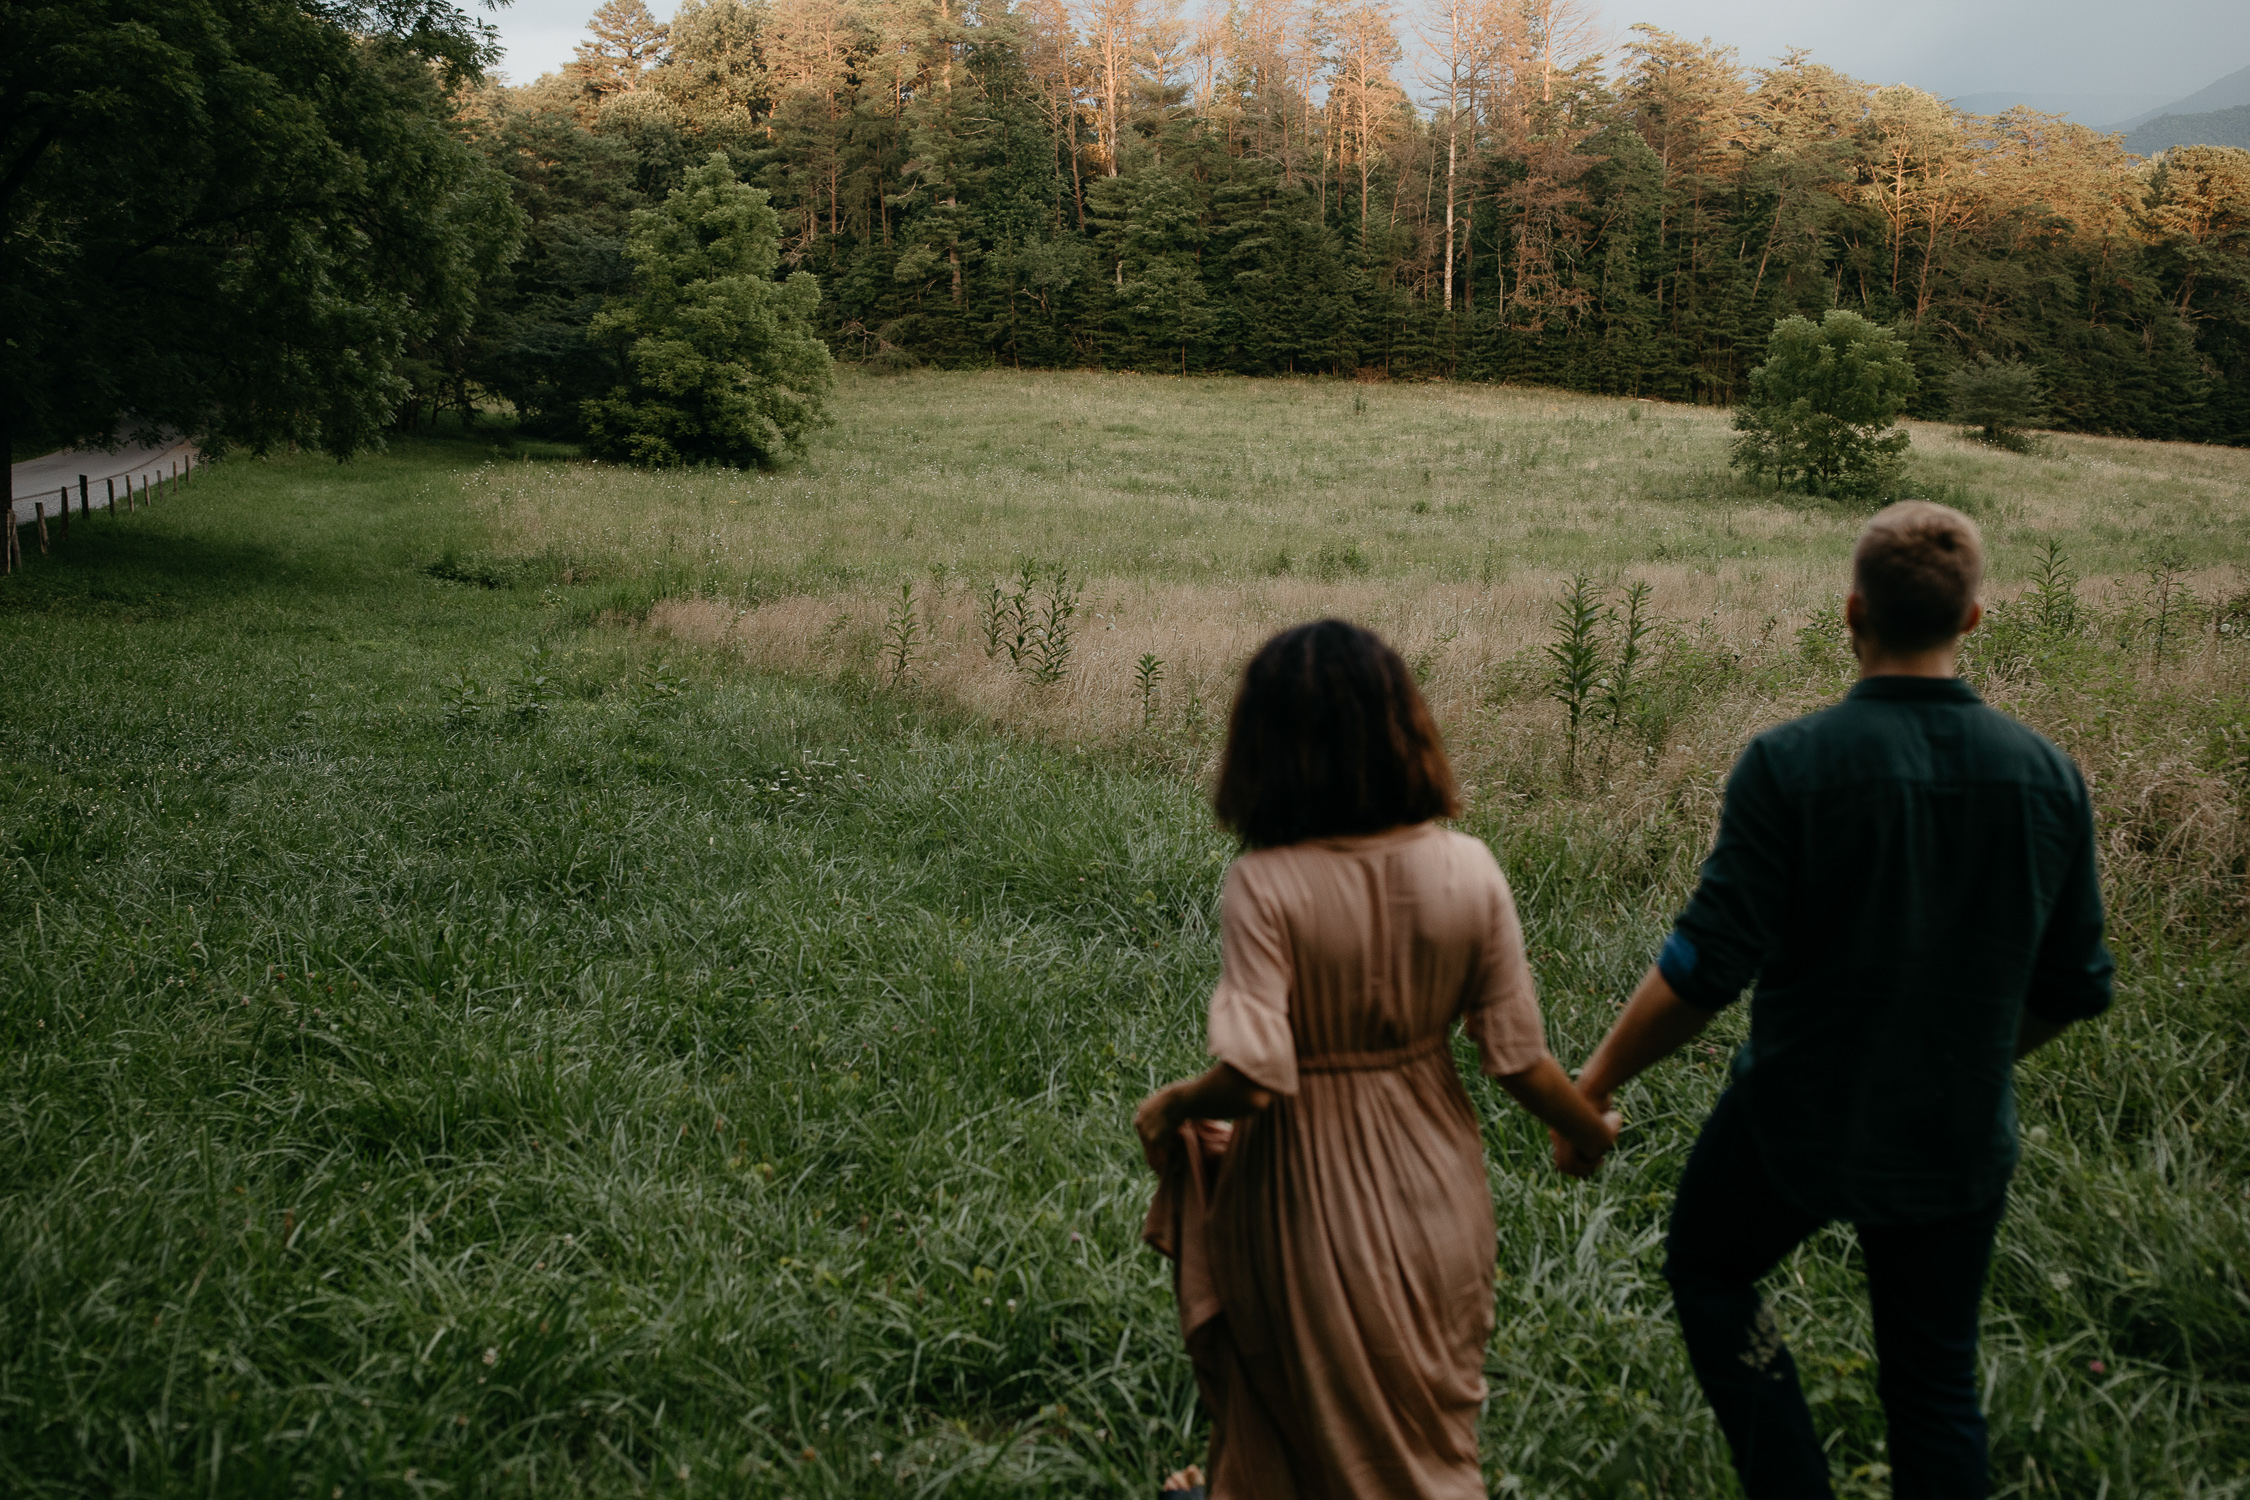 ariannamtorres and isaac engagement session at cades cove smoky mountains elopement-90.jpg